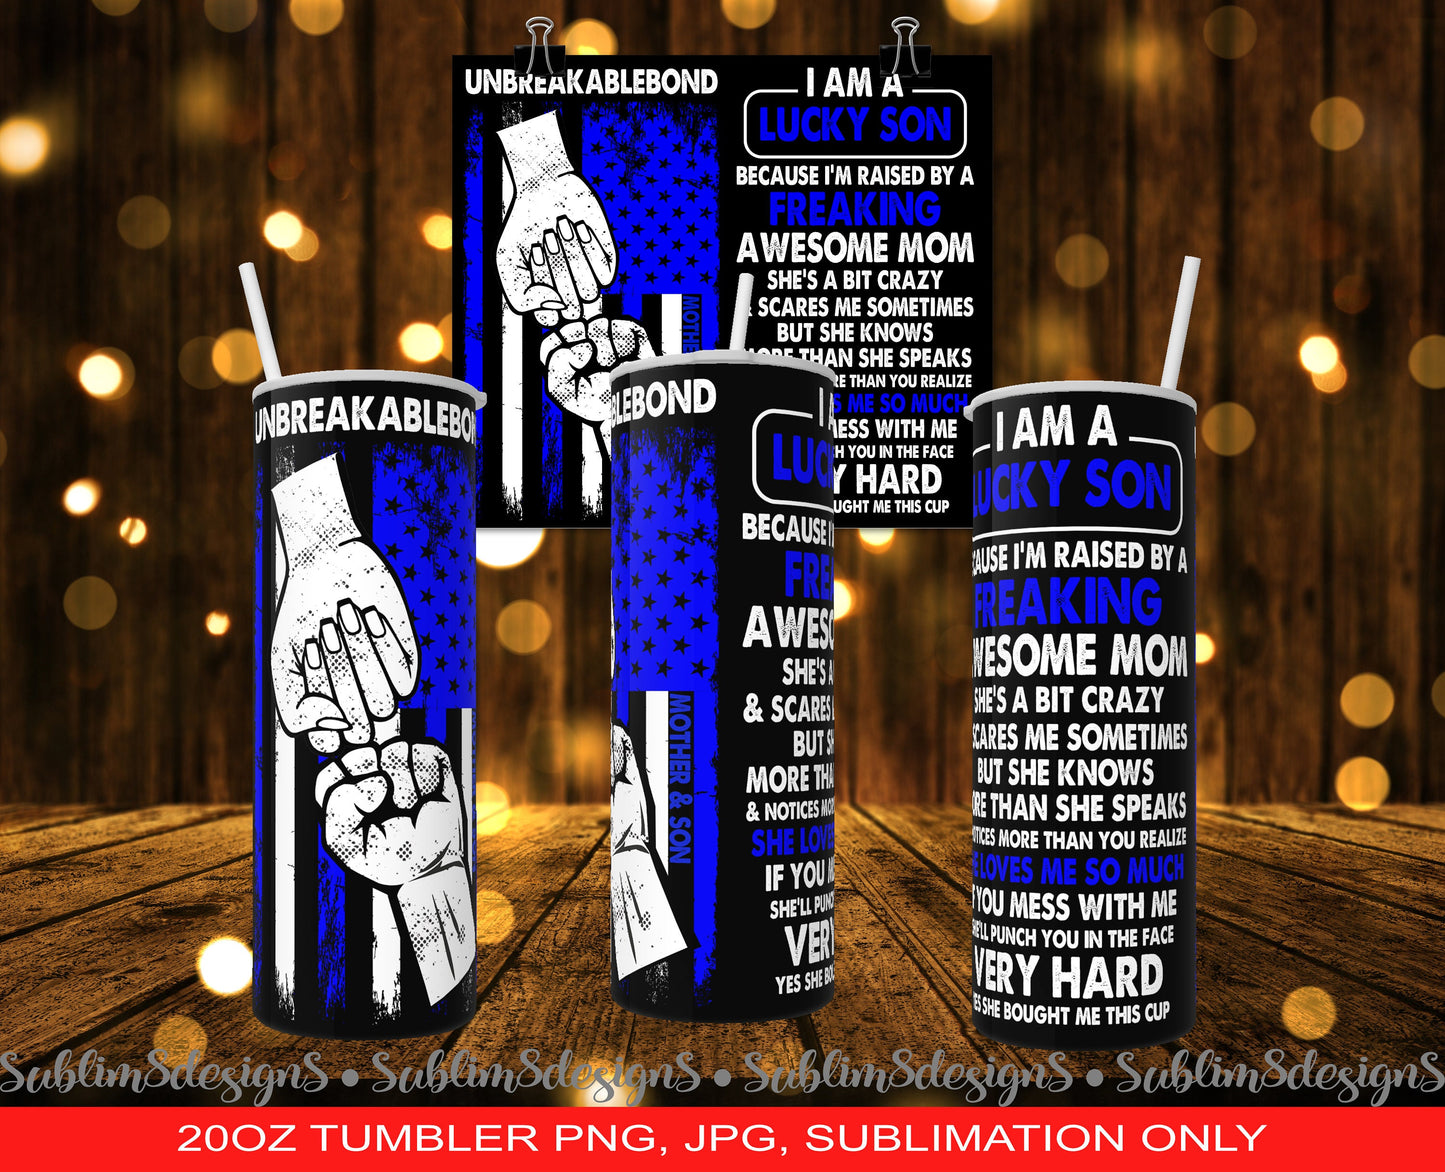 I Am A Lucky Son Unbreakable -  Mother's Day Gift - Perfect for the ultimate momma's boy! - royal blue 20oz Tumbler Design PNG and JPG ONLY